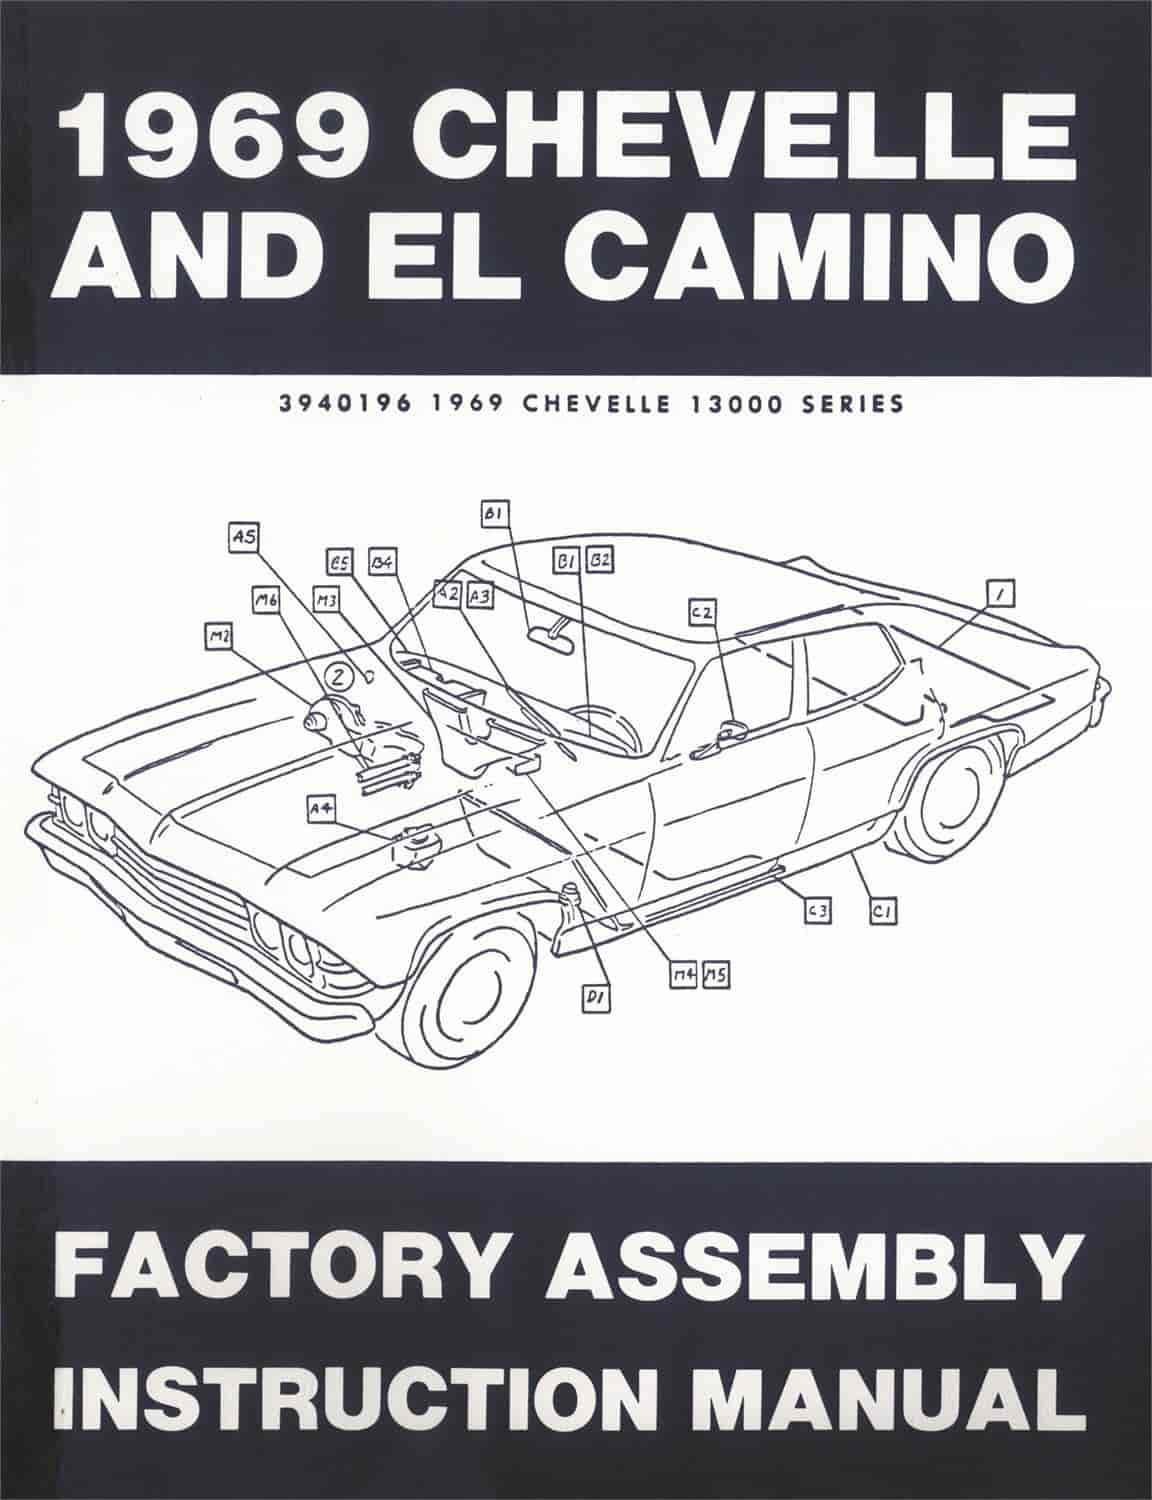 Factory Assembly Manual 1969 Chevy Chevelle & El Camino